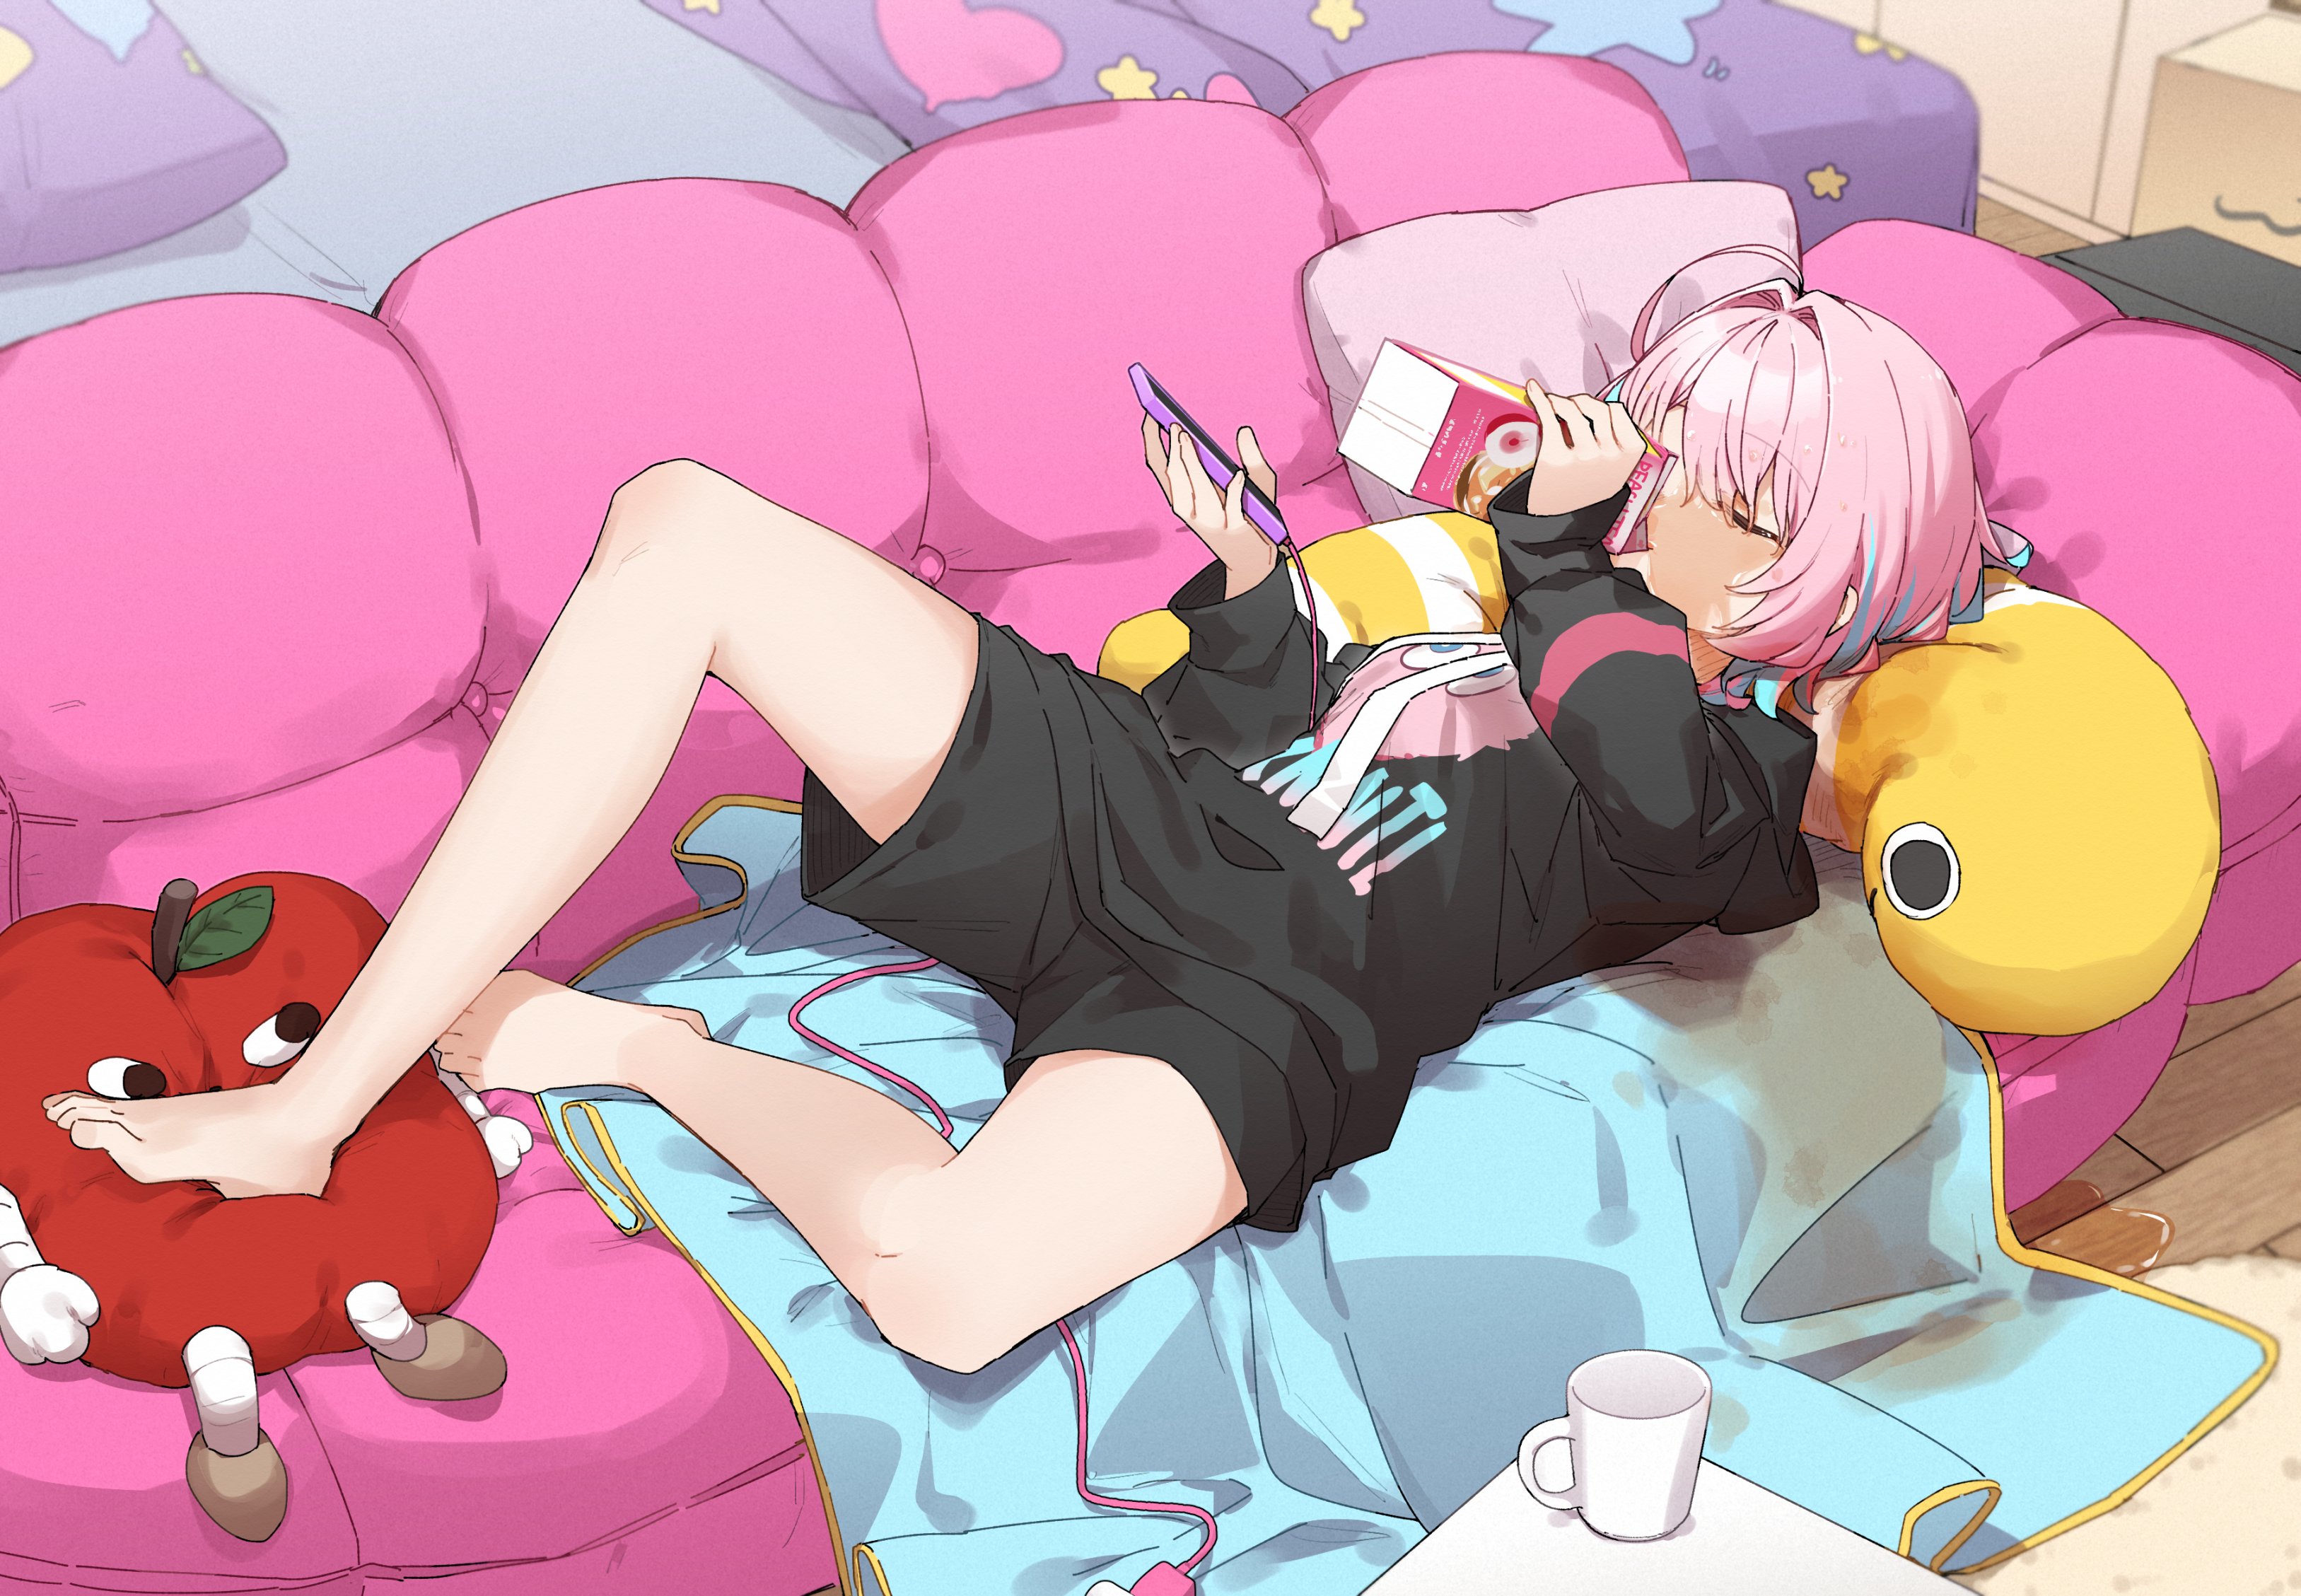 Anime 3254x2257 lying on couch anime girls plush toy smartphone